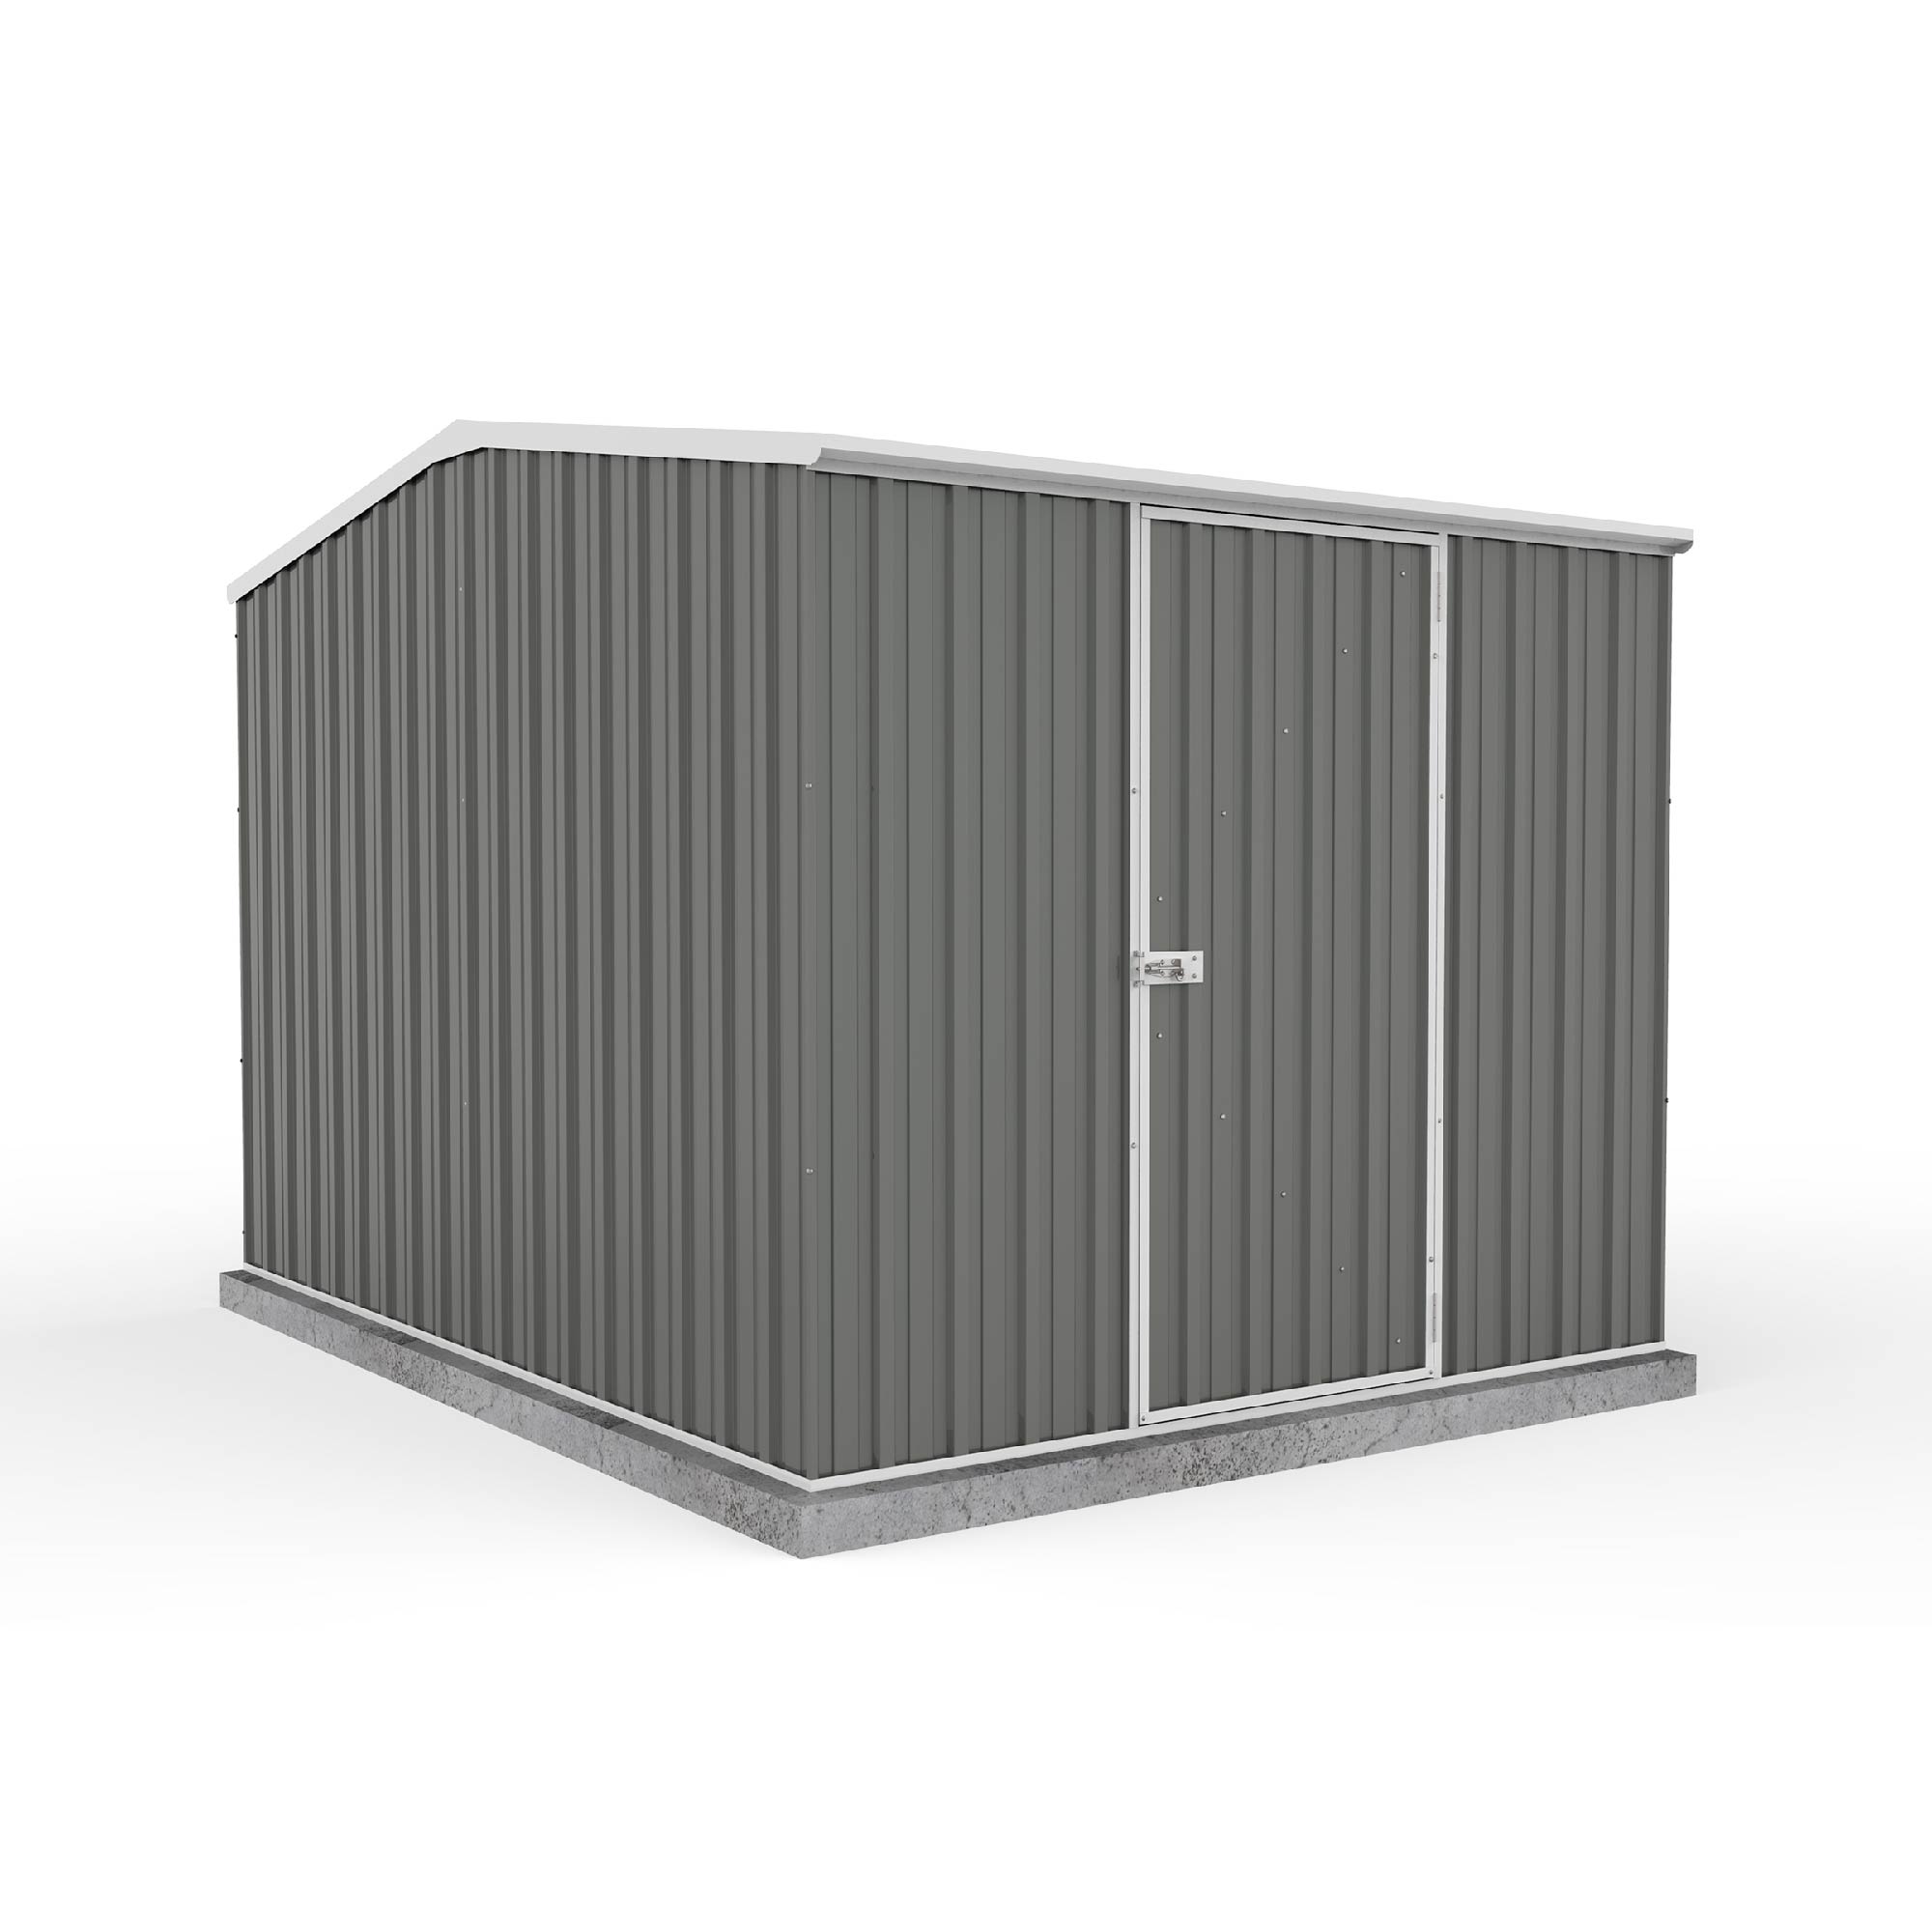 Absco 7' 5 x 10 Monument Premier Metal Shed